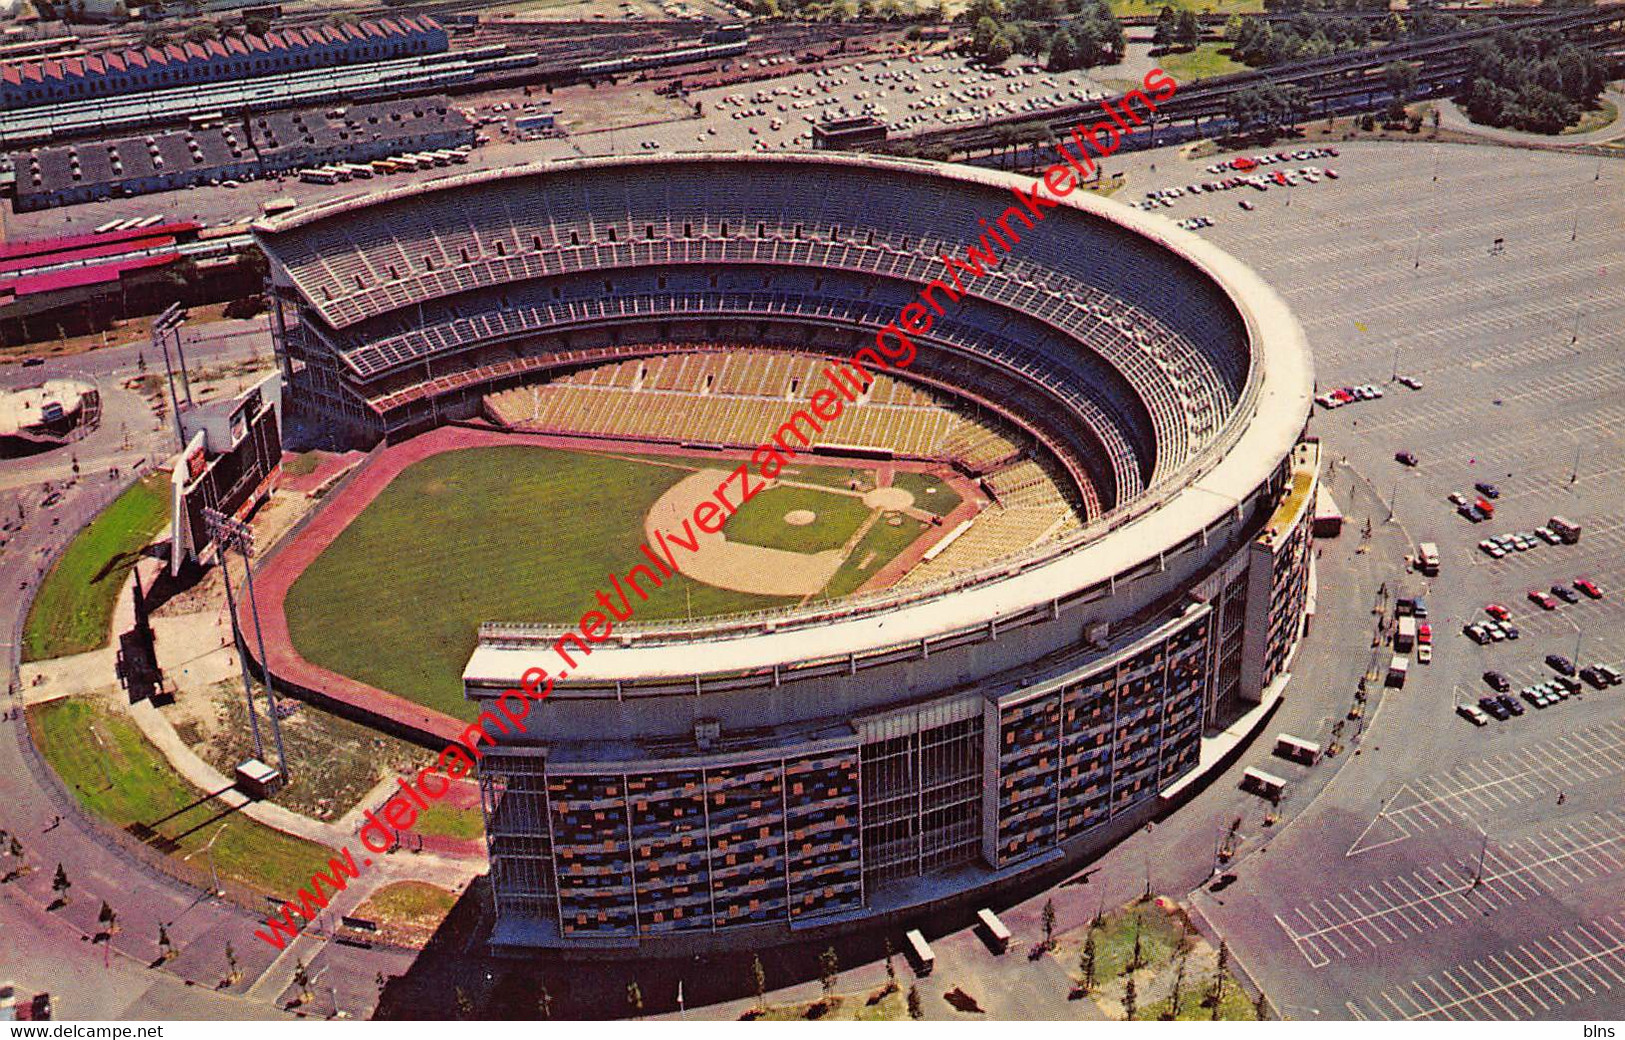 Shea Stadium - Home Of The N.Y. Mets Baseball And Jets Football Teams - Queens - New York City - United States USA - Queens